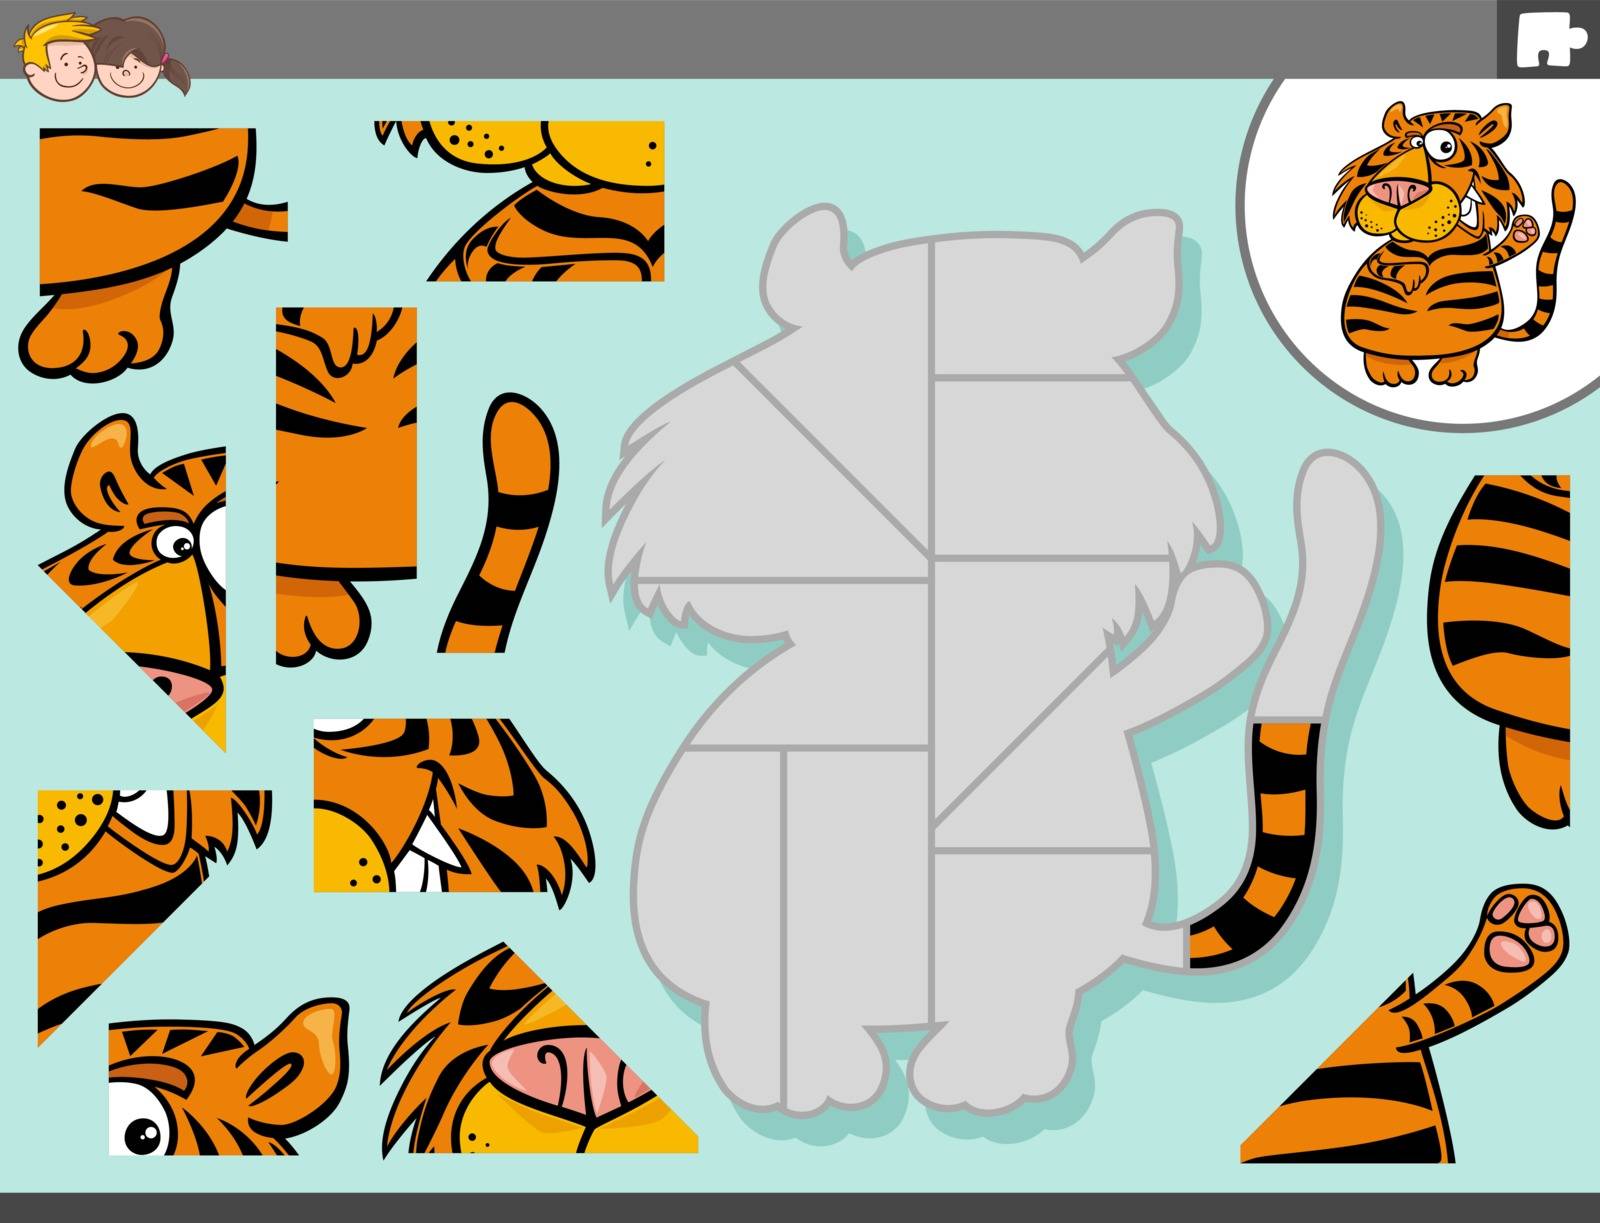 Cartoon Illustration of Educational Jigsaw Puzzle Game for Children with Tiger Animal Character